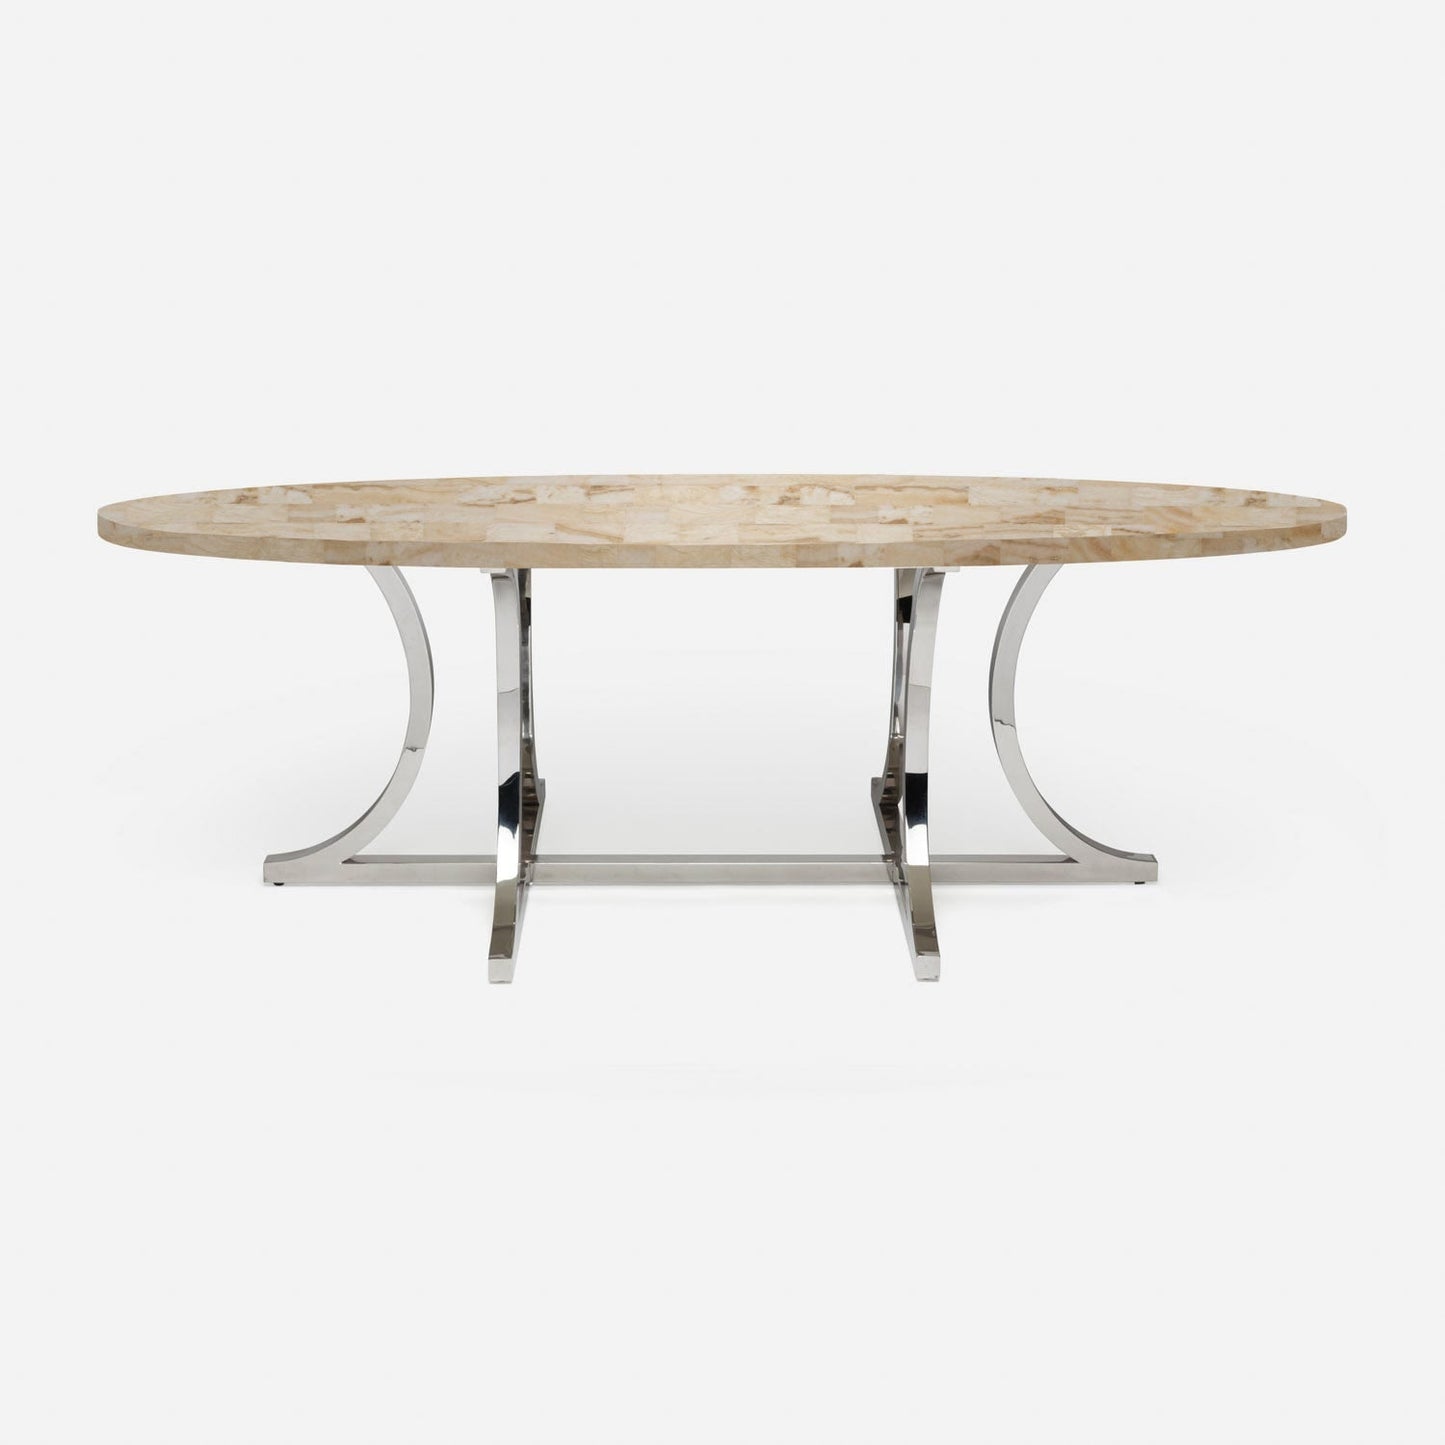 Made Goods Leighton 84" x 42" x 30" Polished Silver Steel Dinning Table With Oval Beige Crystal Stone Table Top